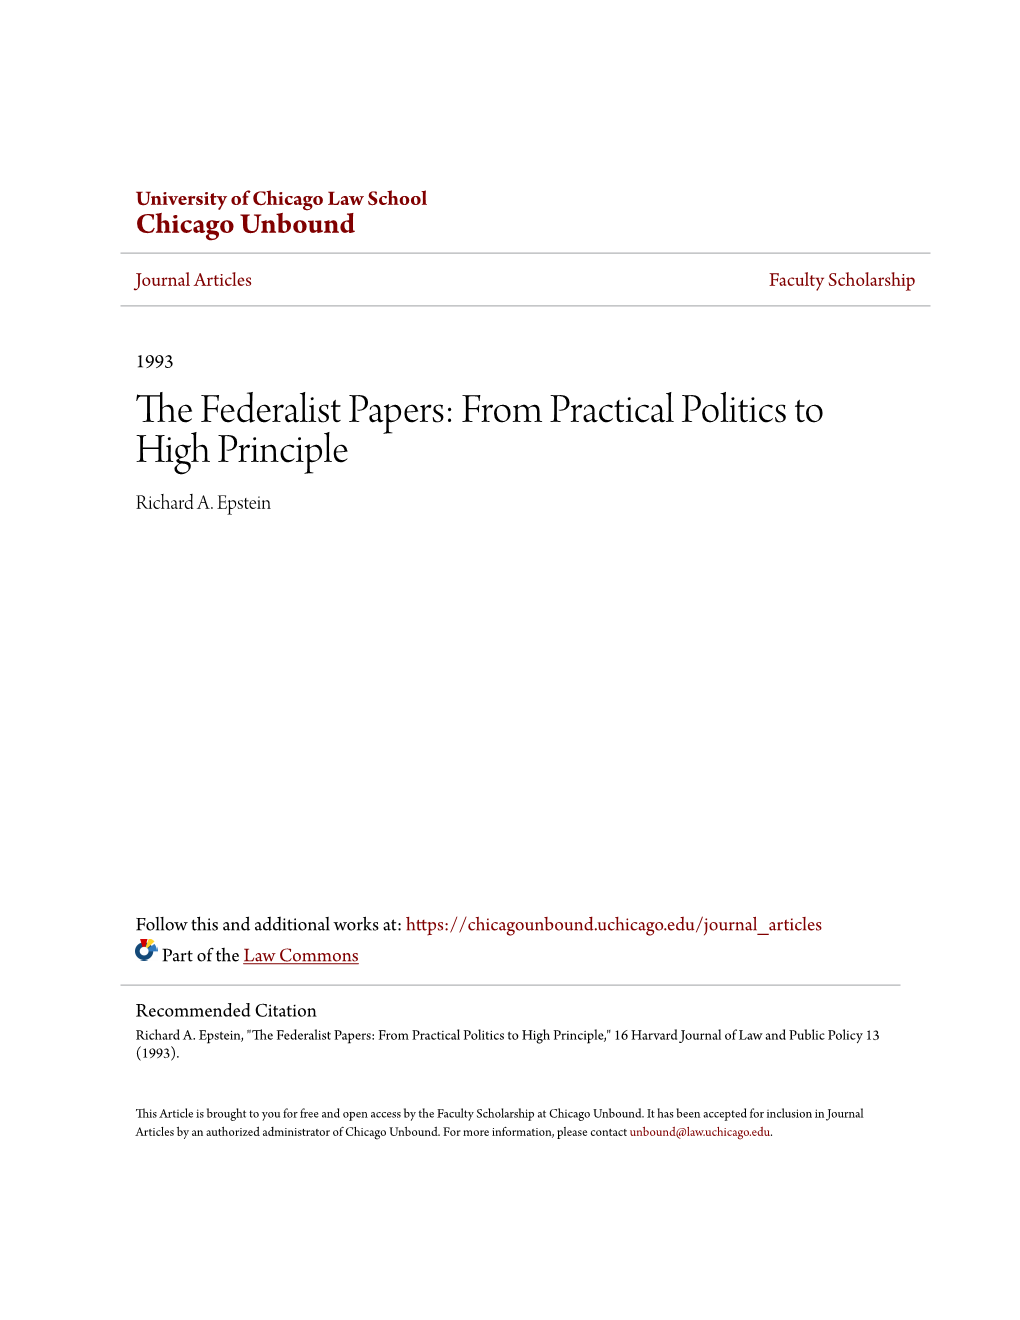 The Federalist Papers: from Practical Politics to High Principle